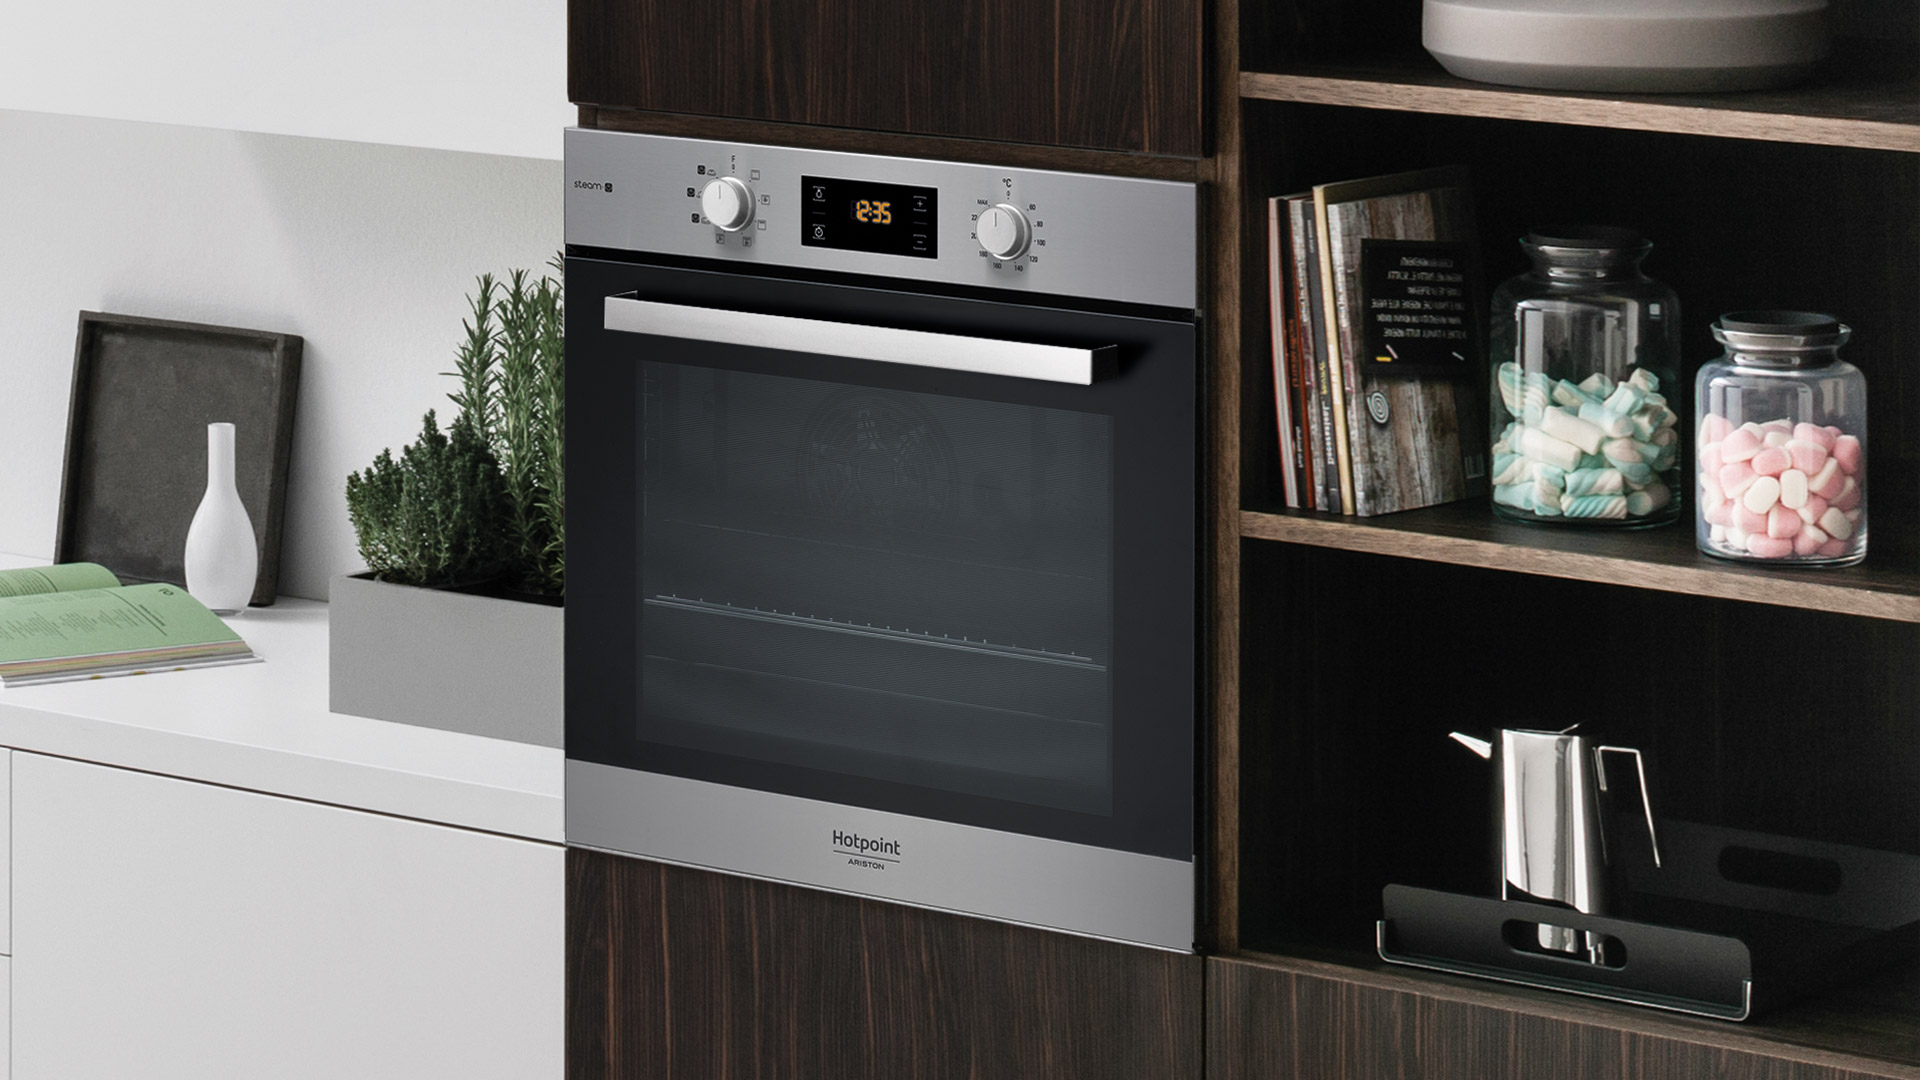 You can boost the flavour of your food threefold with a touch of steam from the new Hotpoint oven